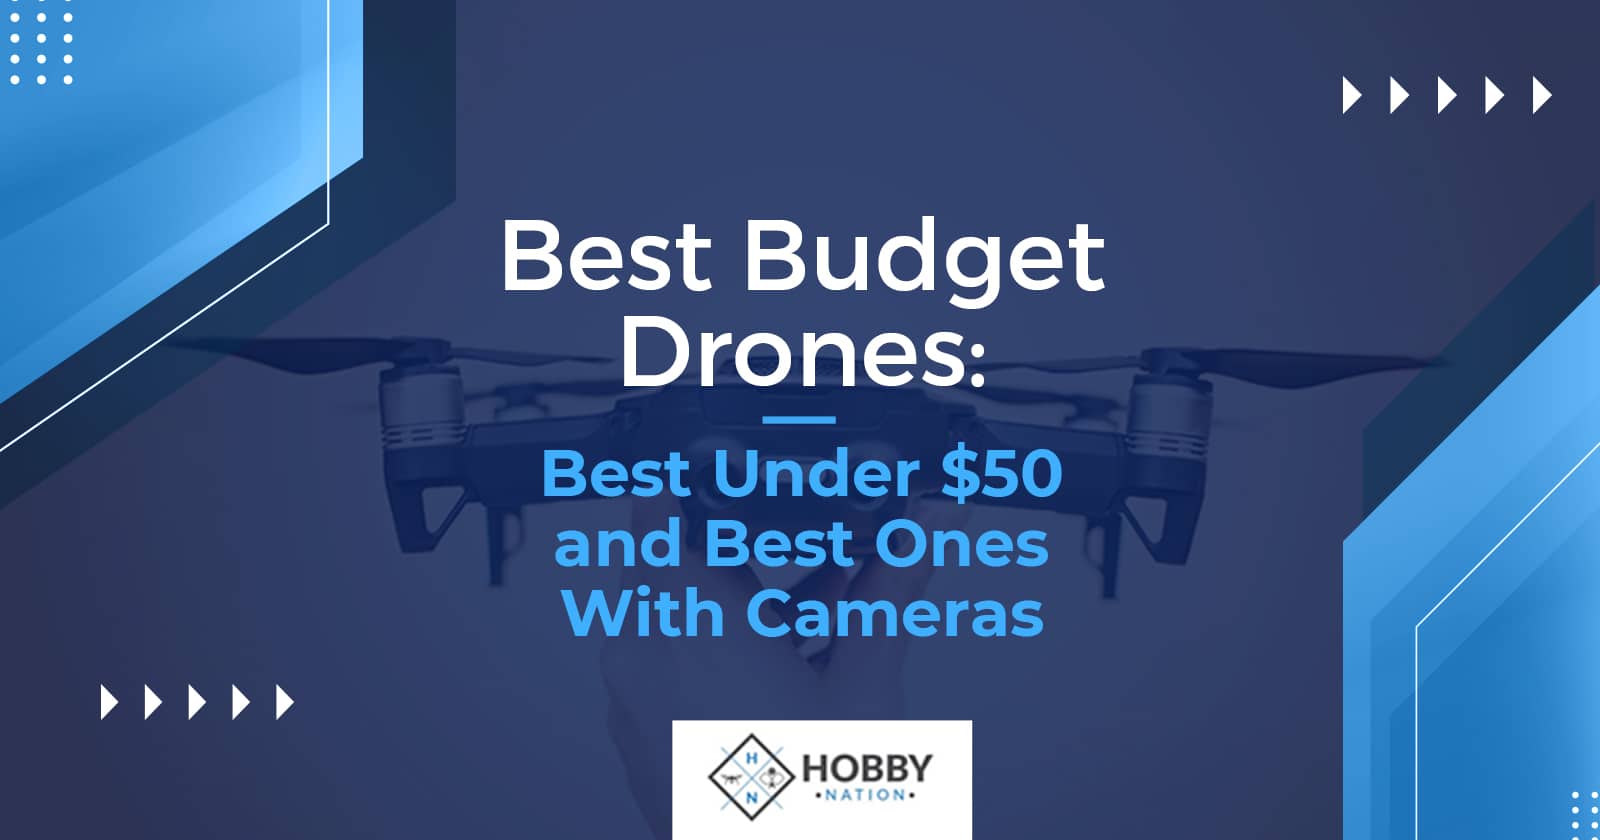 Best Budget Drones: Best Under $50 And Best Ones With Camera